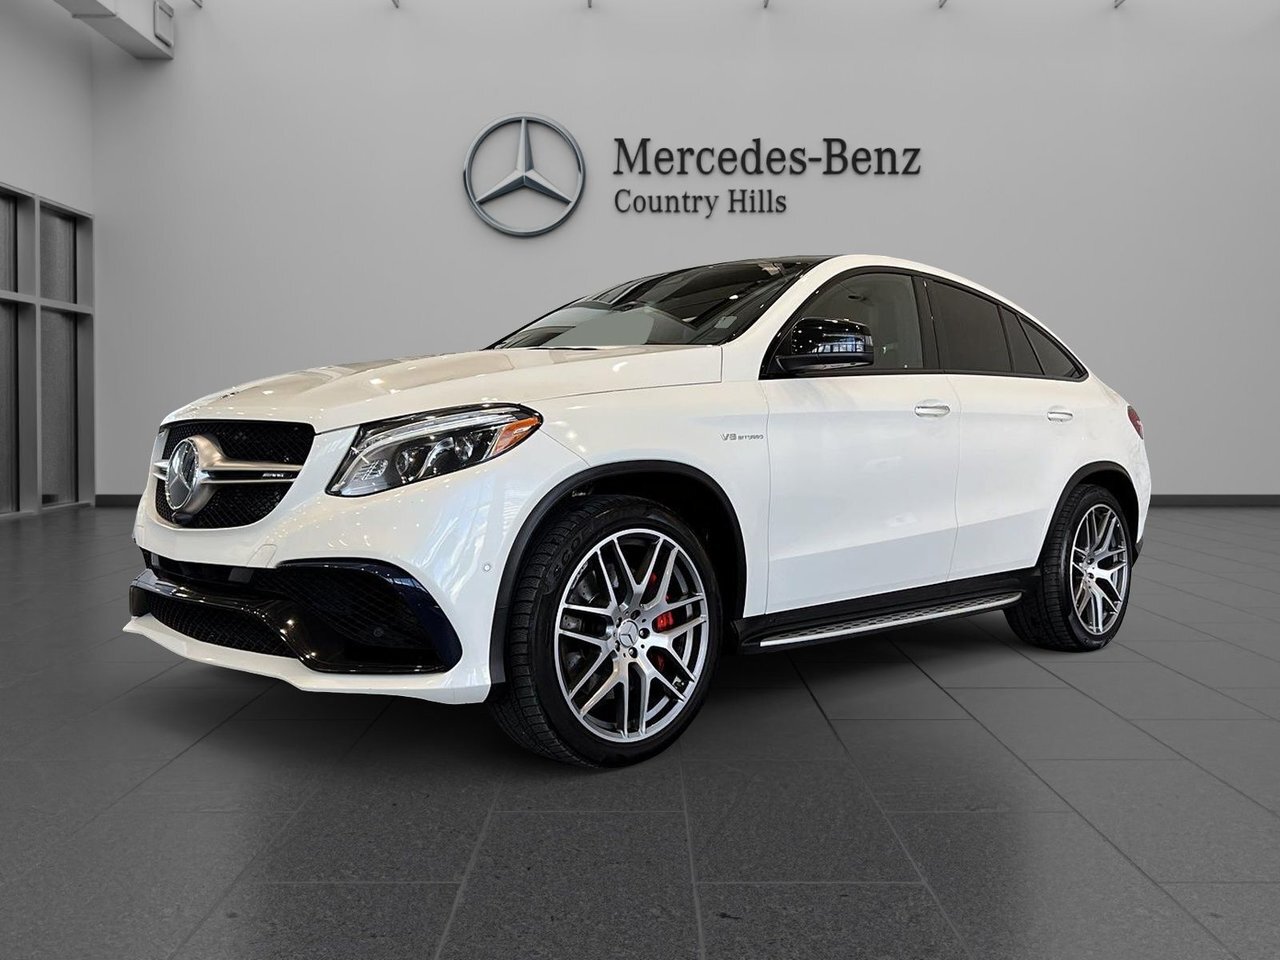 2019 Mercedes-Benz GLE63 AMG S 4M Coupe AMG 63 COUPE! Extended warranty!